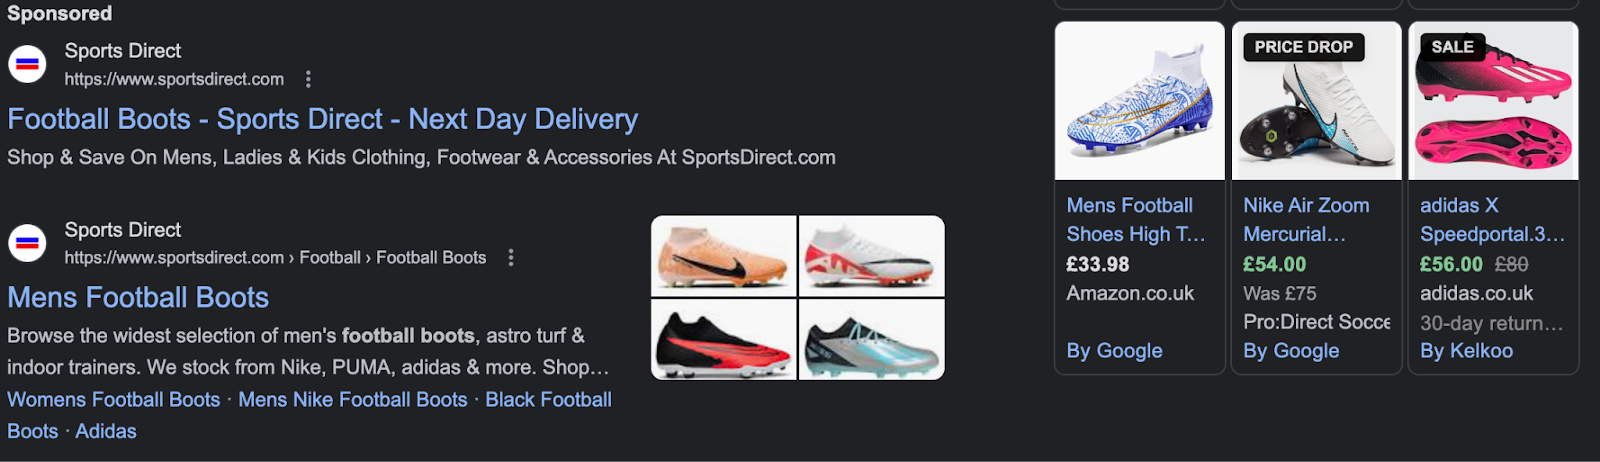 Screenshot of a sponsored and organic listing from Sports Direct in the Google search results. 